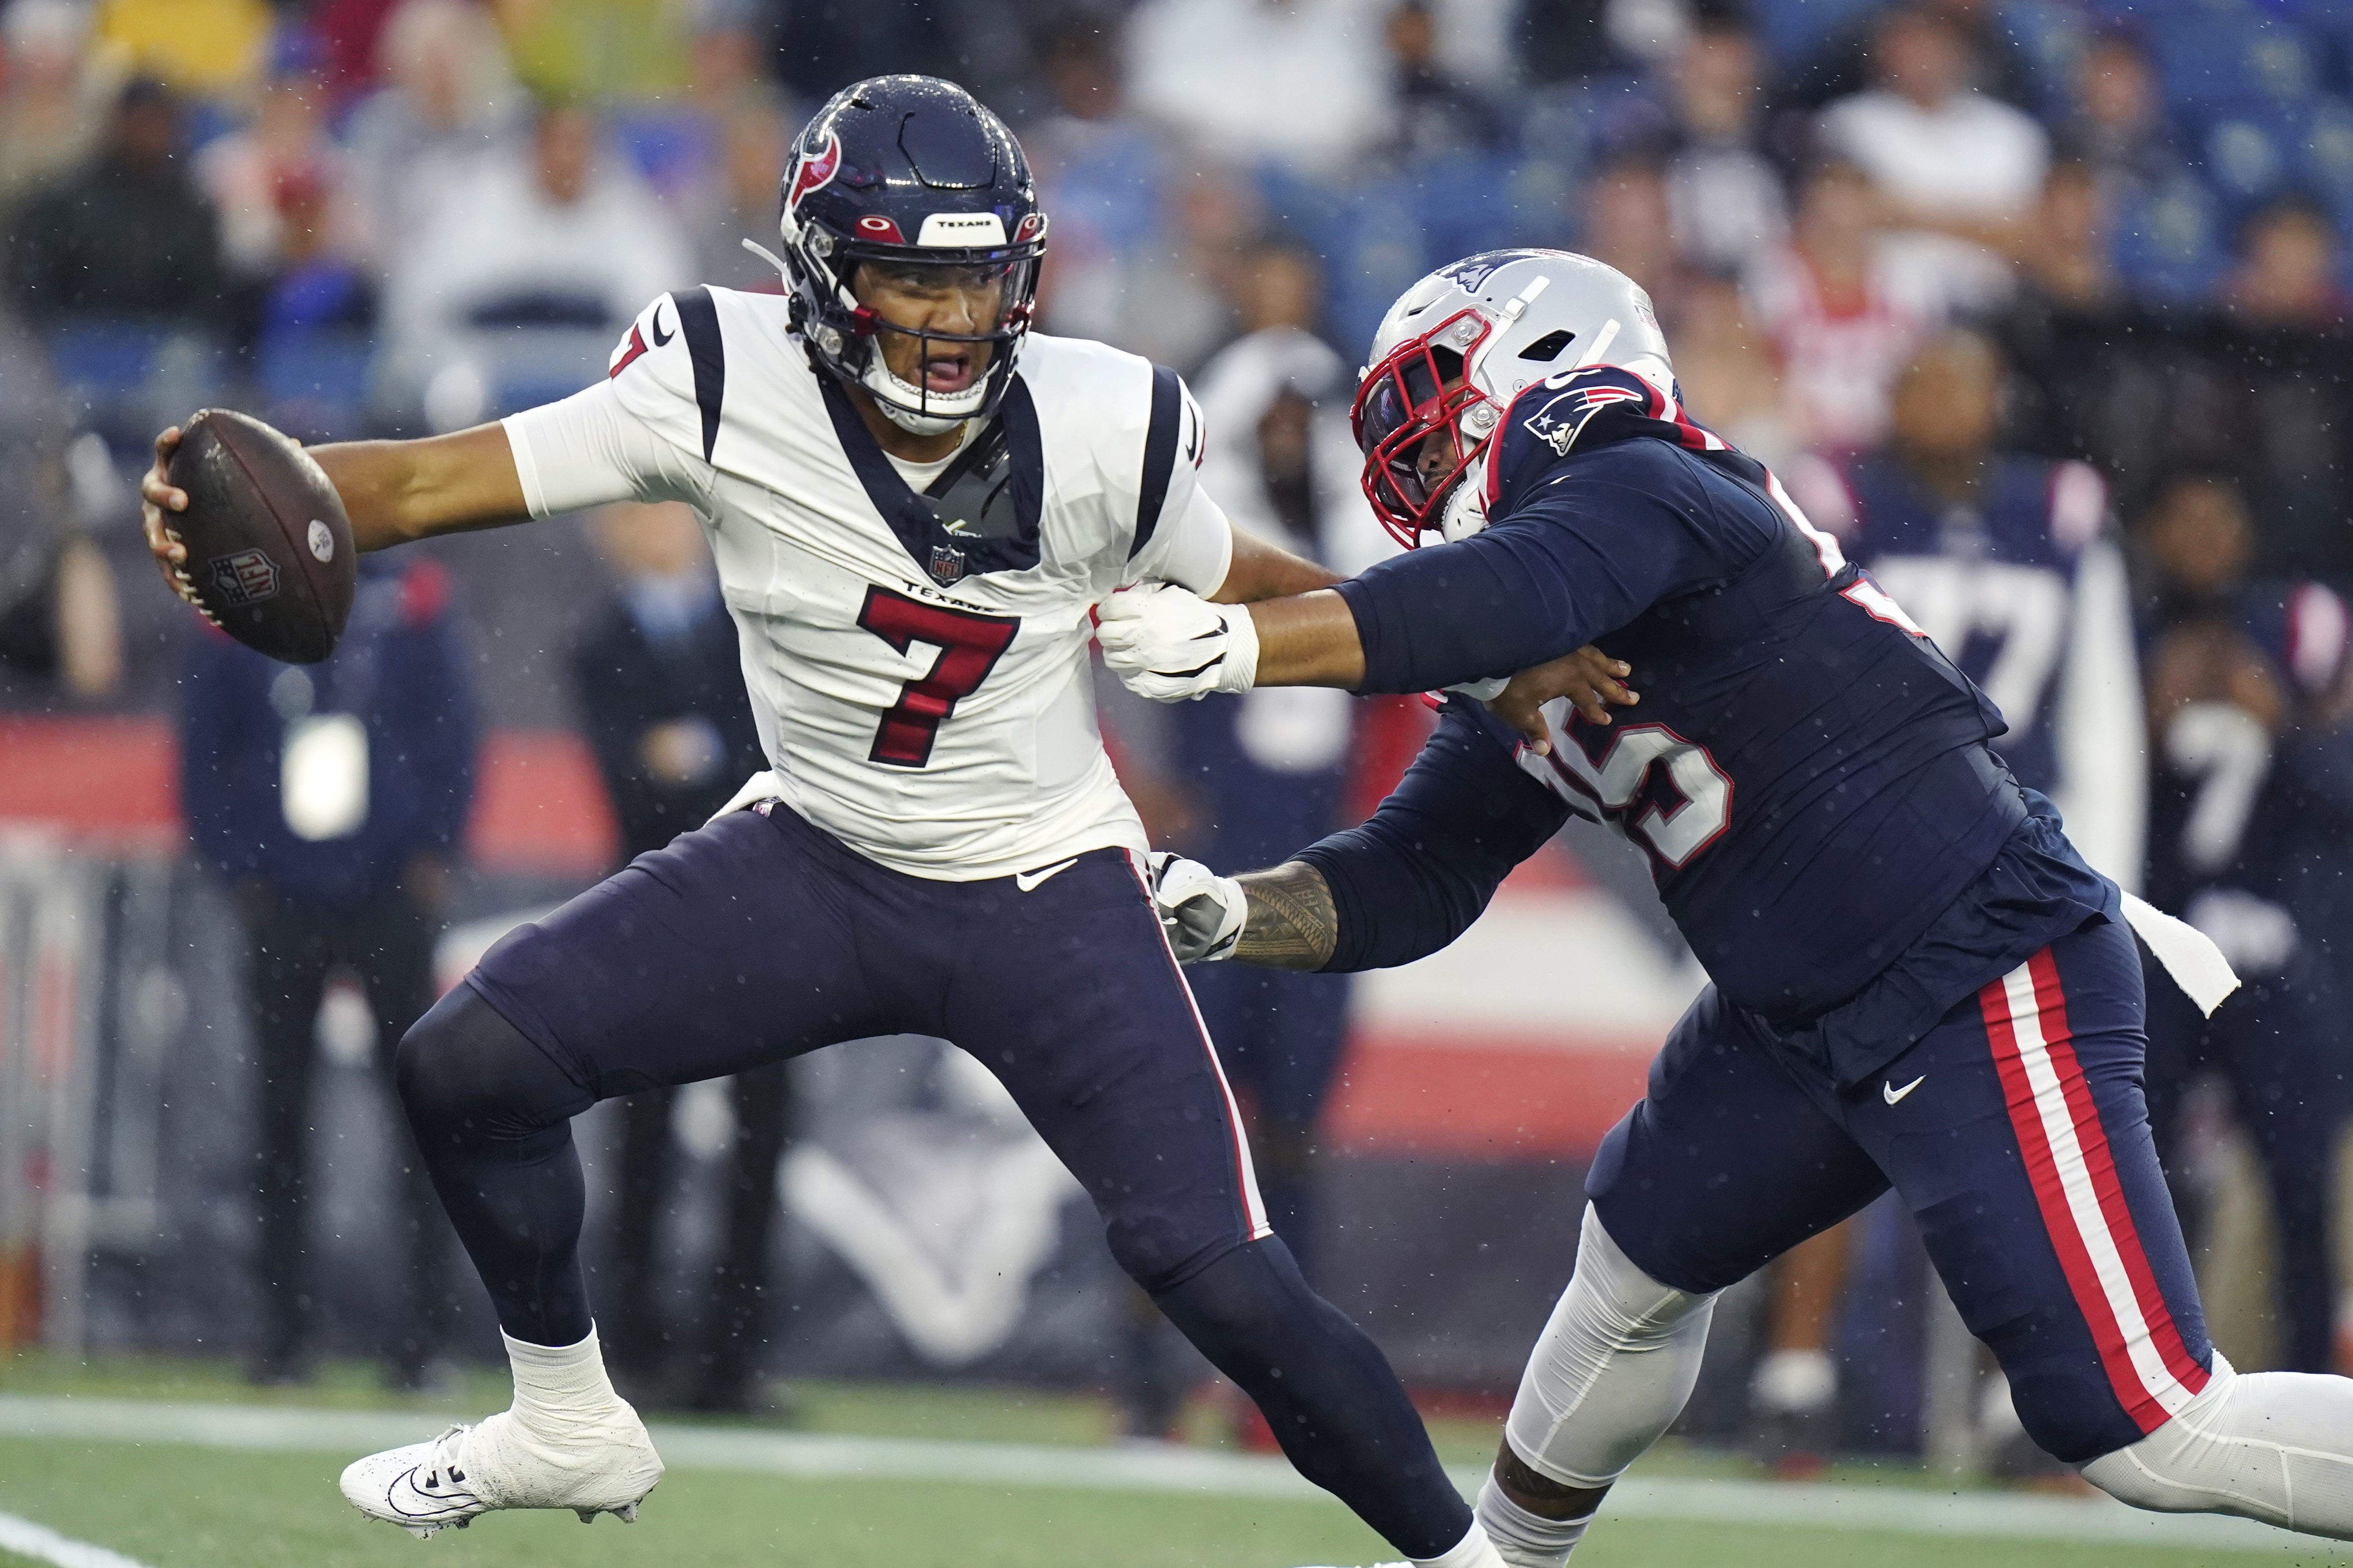 3 Observations from the first Houston Texans preseason game